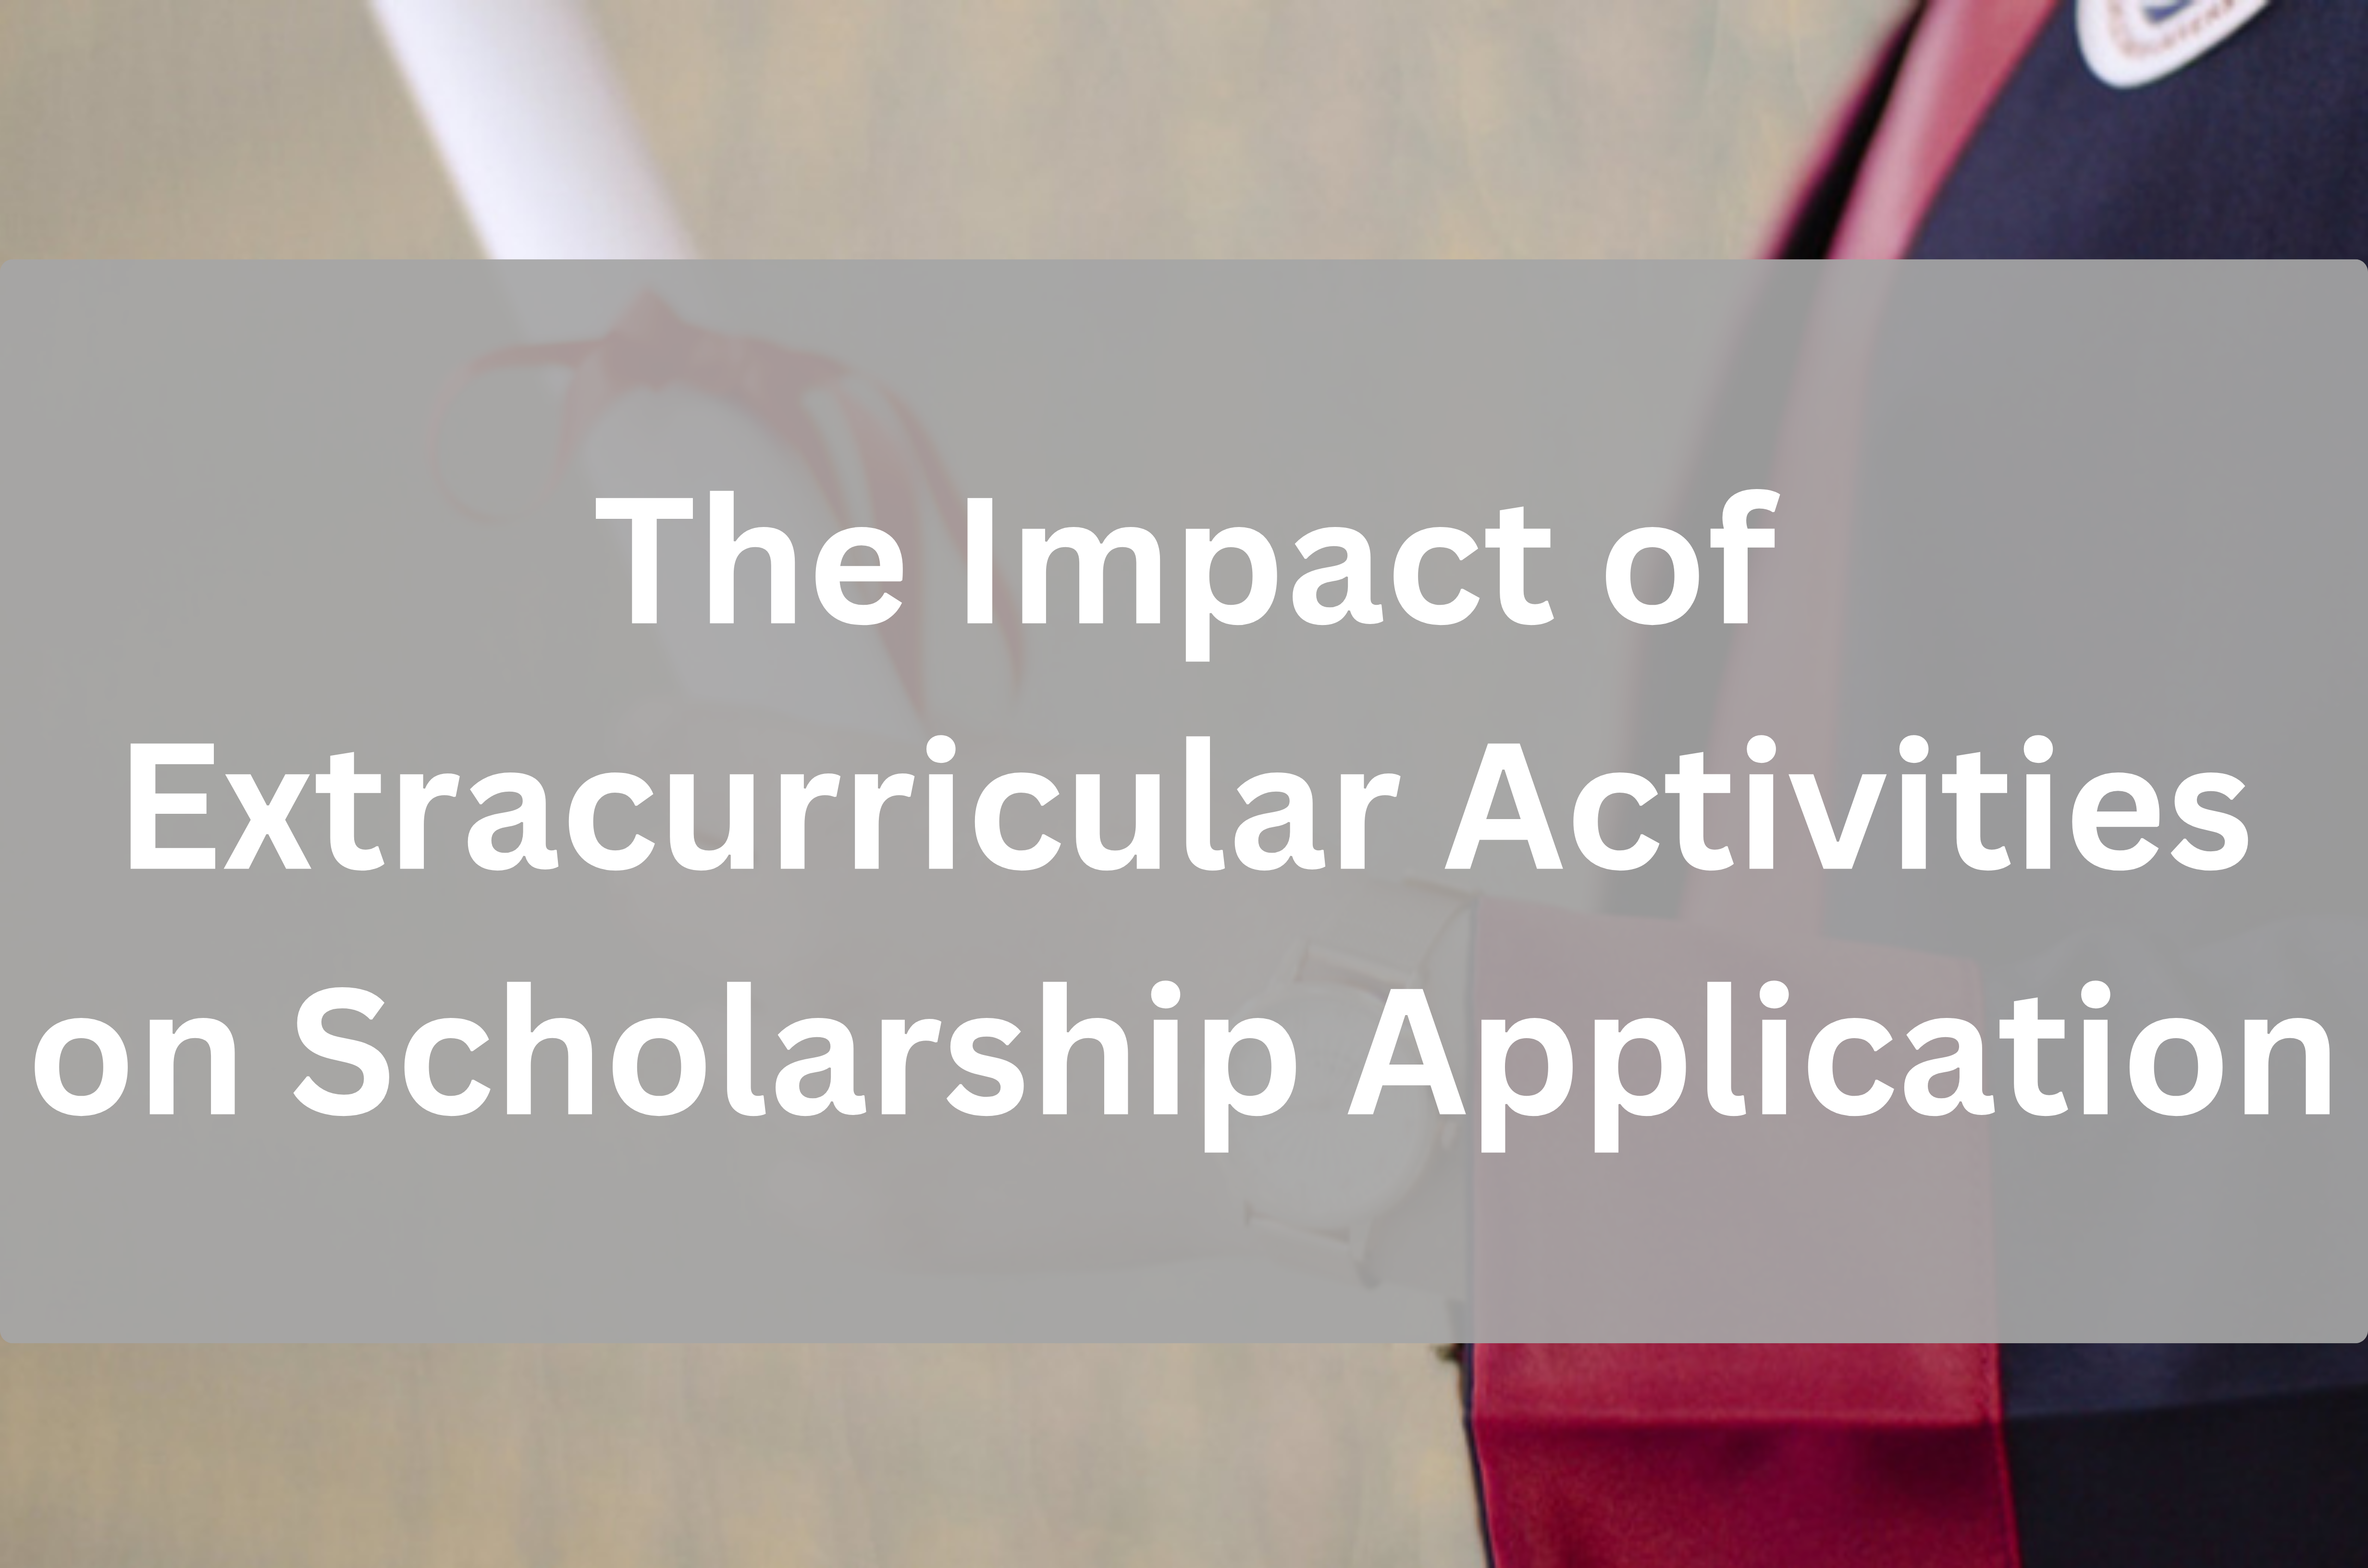 The Impact of Extracurricular Activities on Scholarship Application